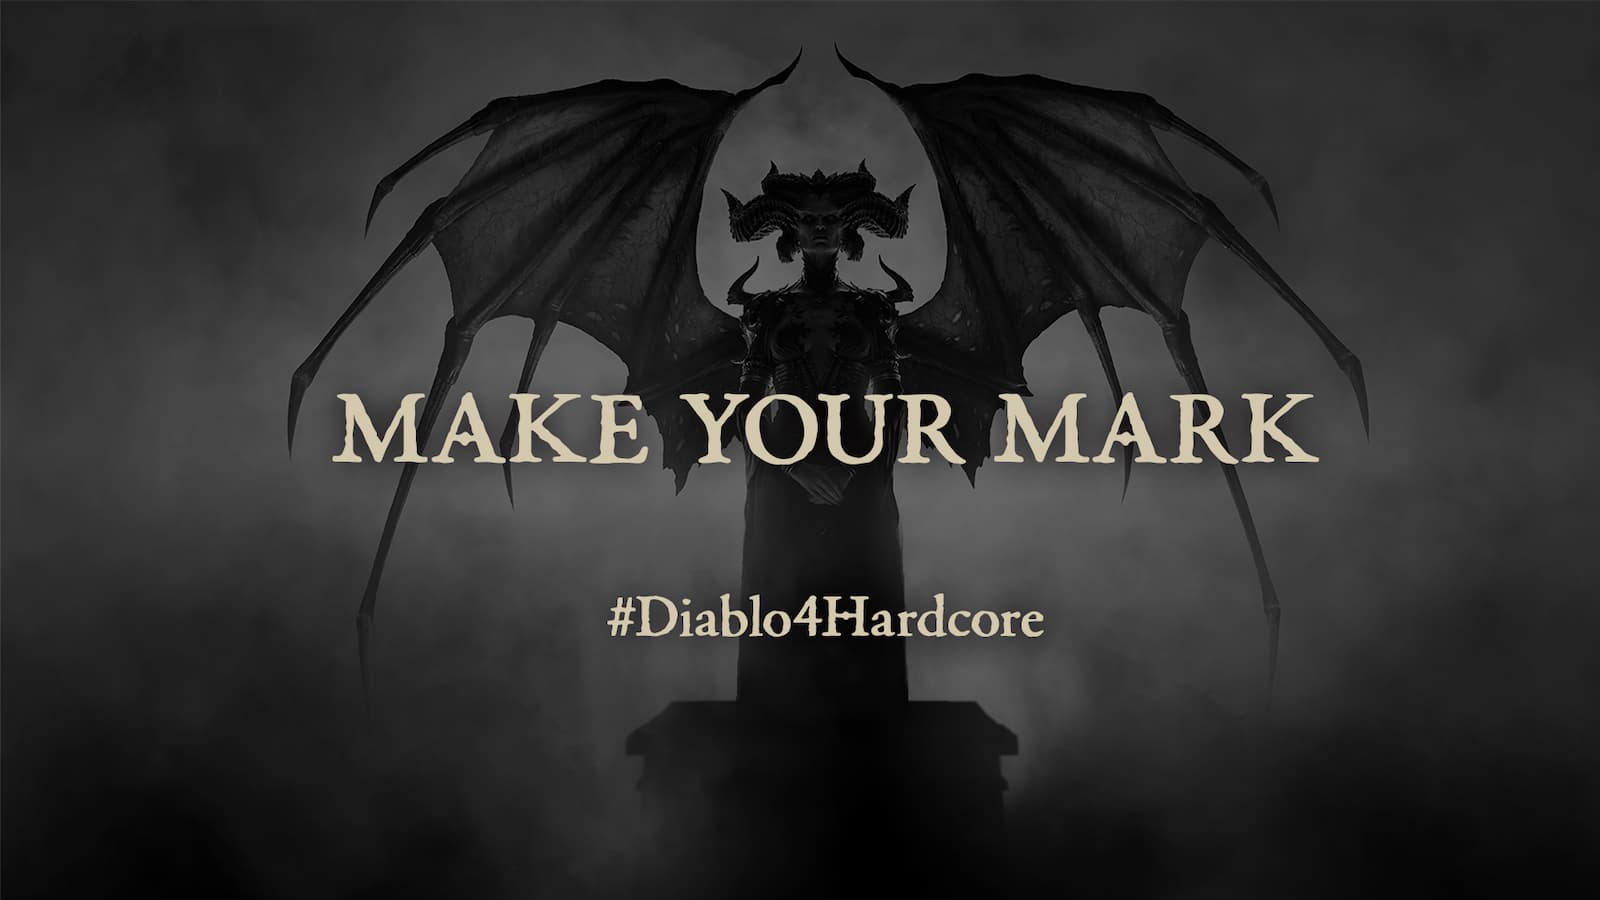 Diablo 4 make your mark image showing off the hardcore mode challenge